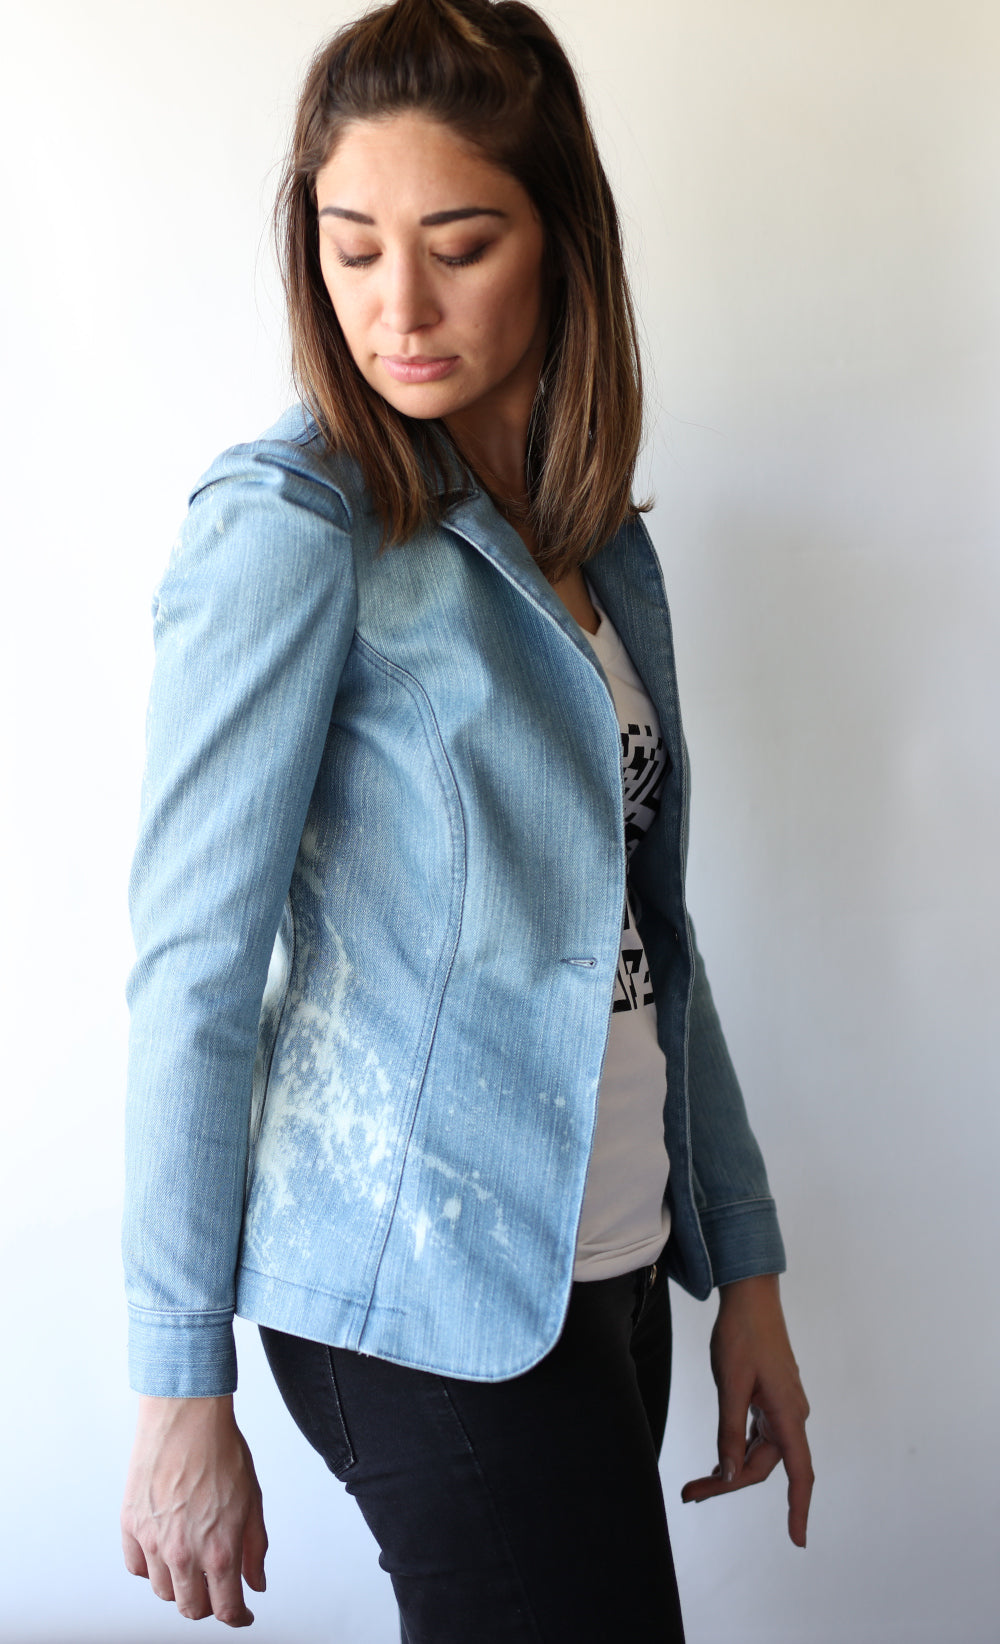 SOLD - Haute Couture One of a Kind Up-cycled New Jacket "Vegan Rebel" Collab & Design by Jarod-Pi